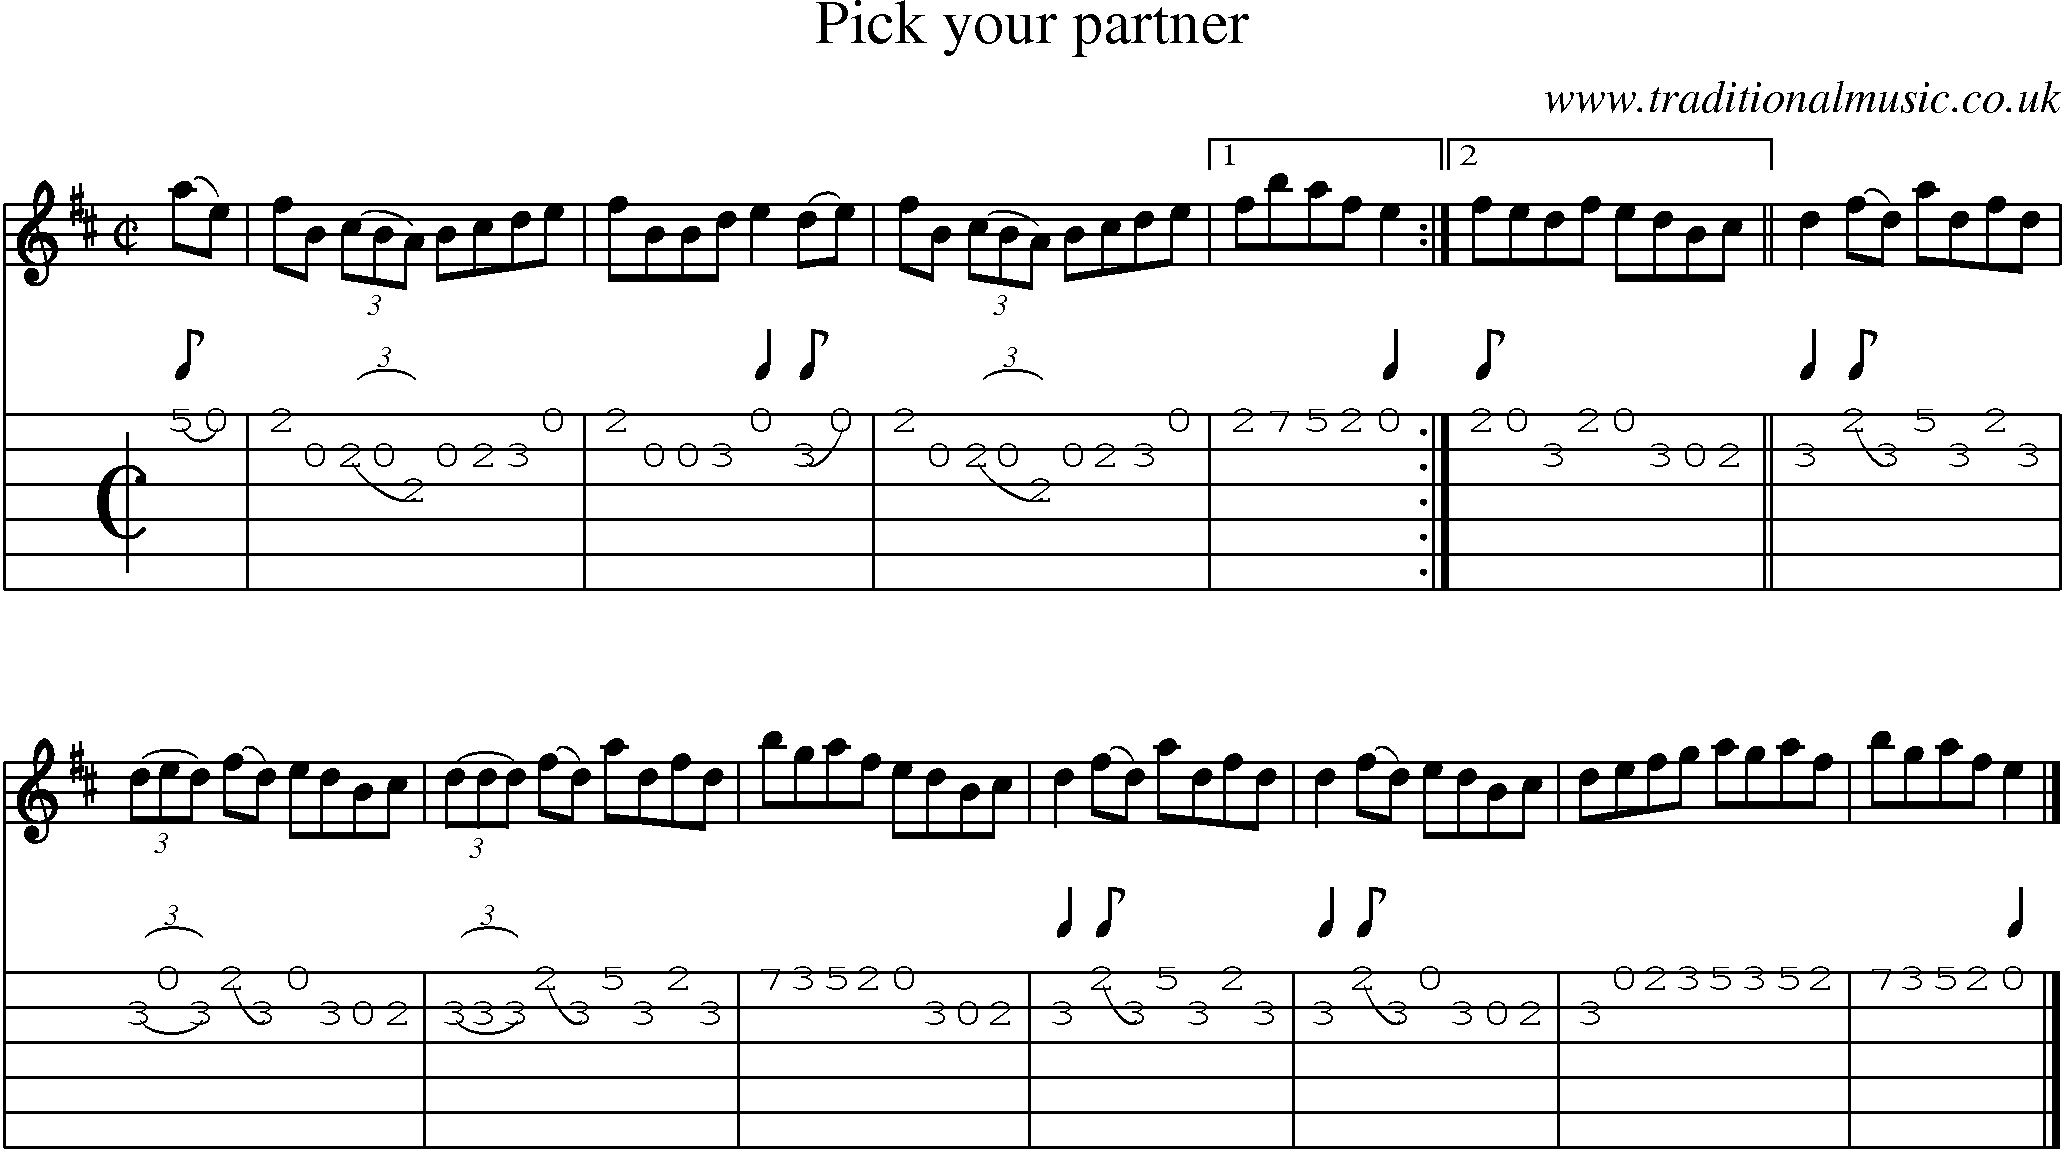 Music Score and Guitar Tabs for Pick Your Partner